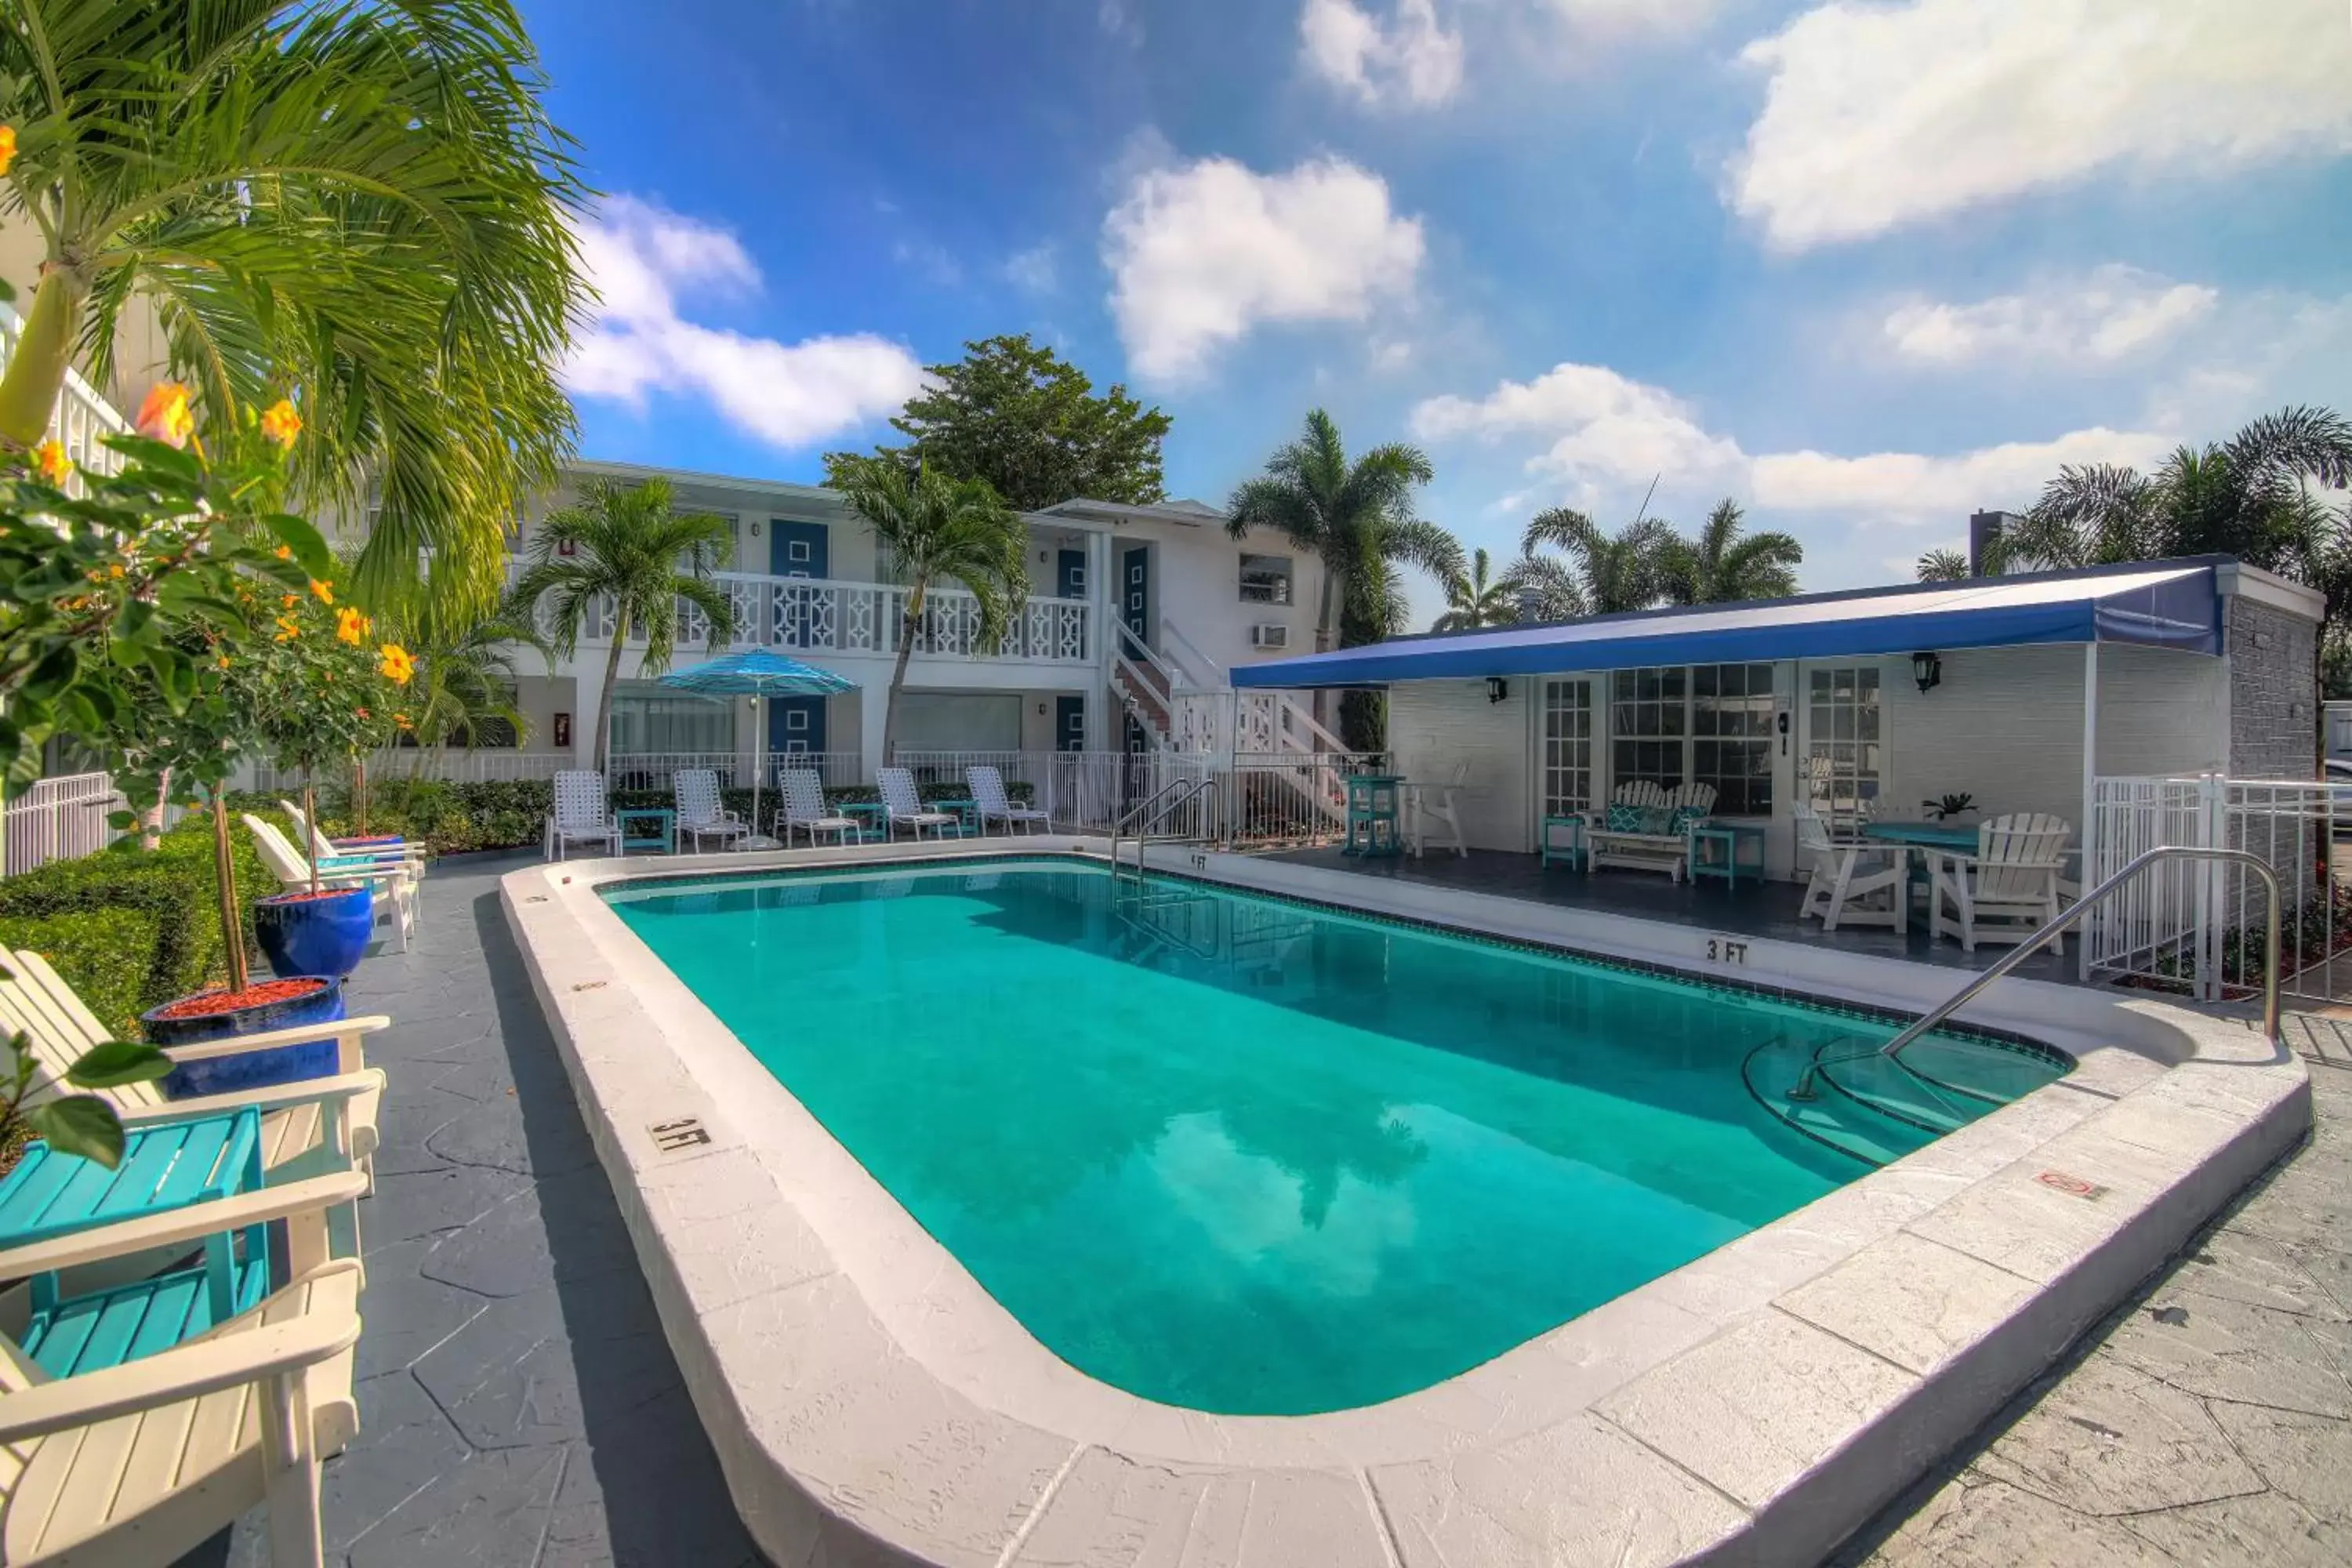 Property building, Swimming Pool in May-Dee Suites in Florida